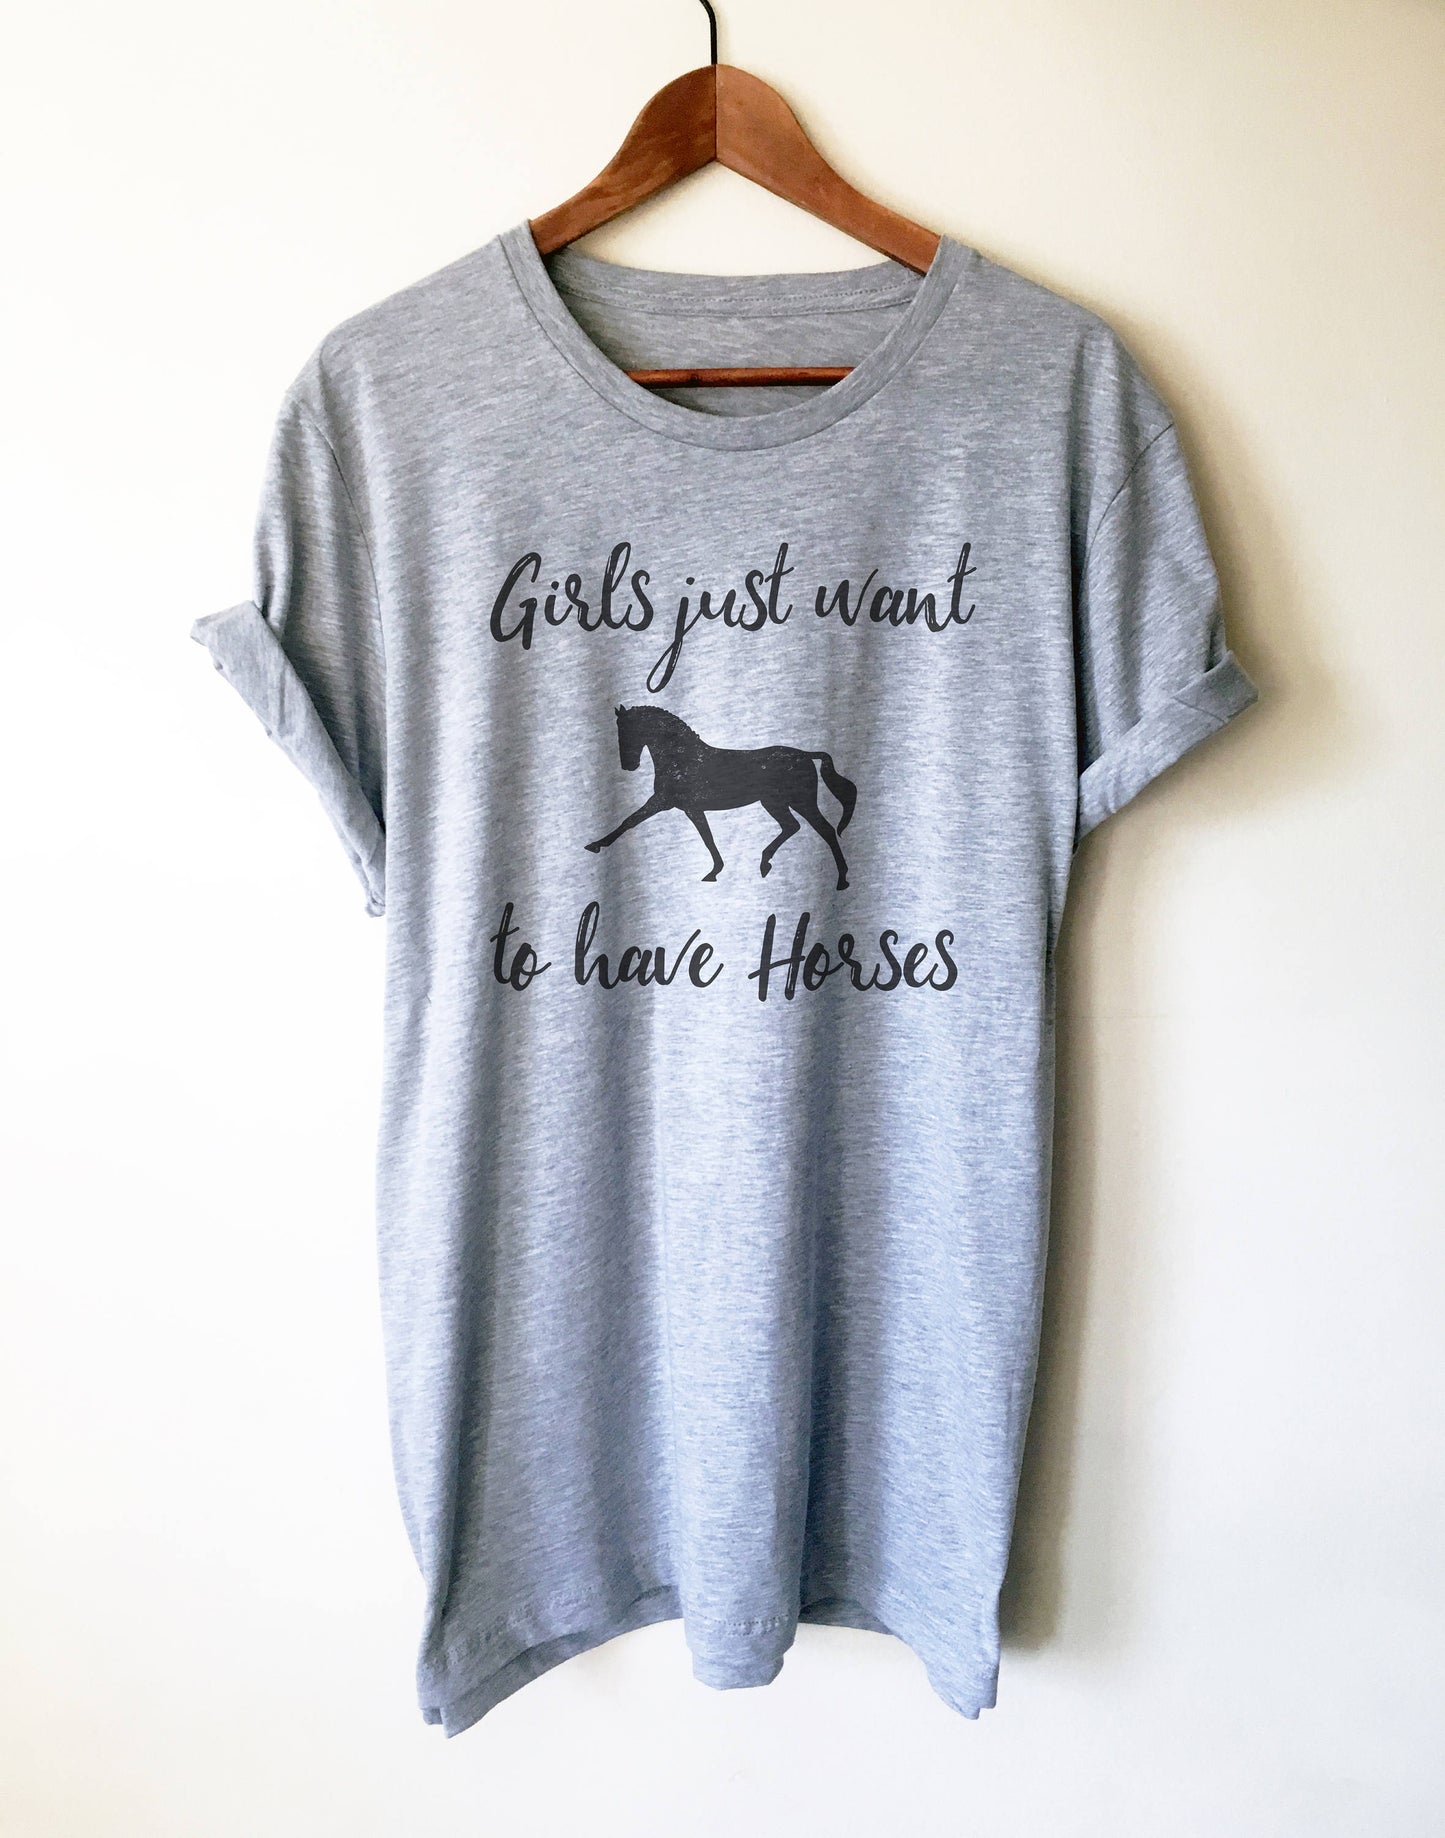 Girls Just Want To Have Horses Unisex Shirt-Horse Lover Gift, Country Shirt, Horse Lover, Cowgirl Shirts, Equestrian Gift, Horse Racing Gift